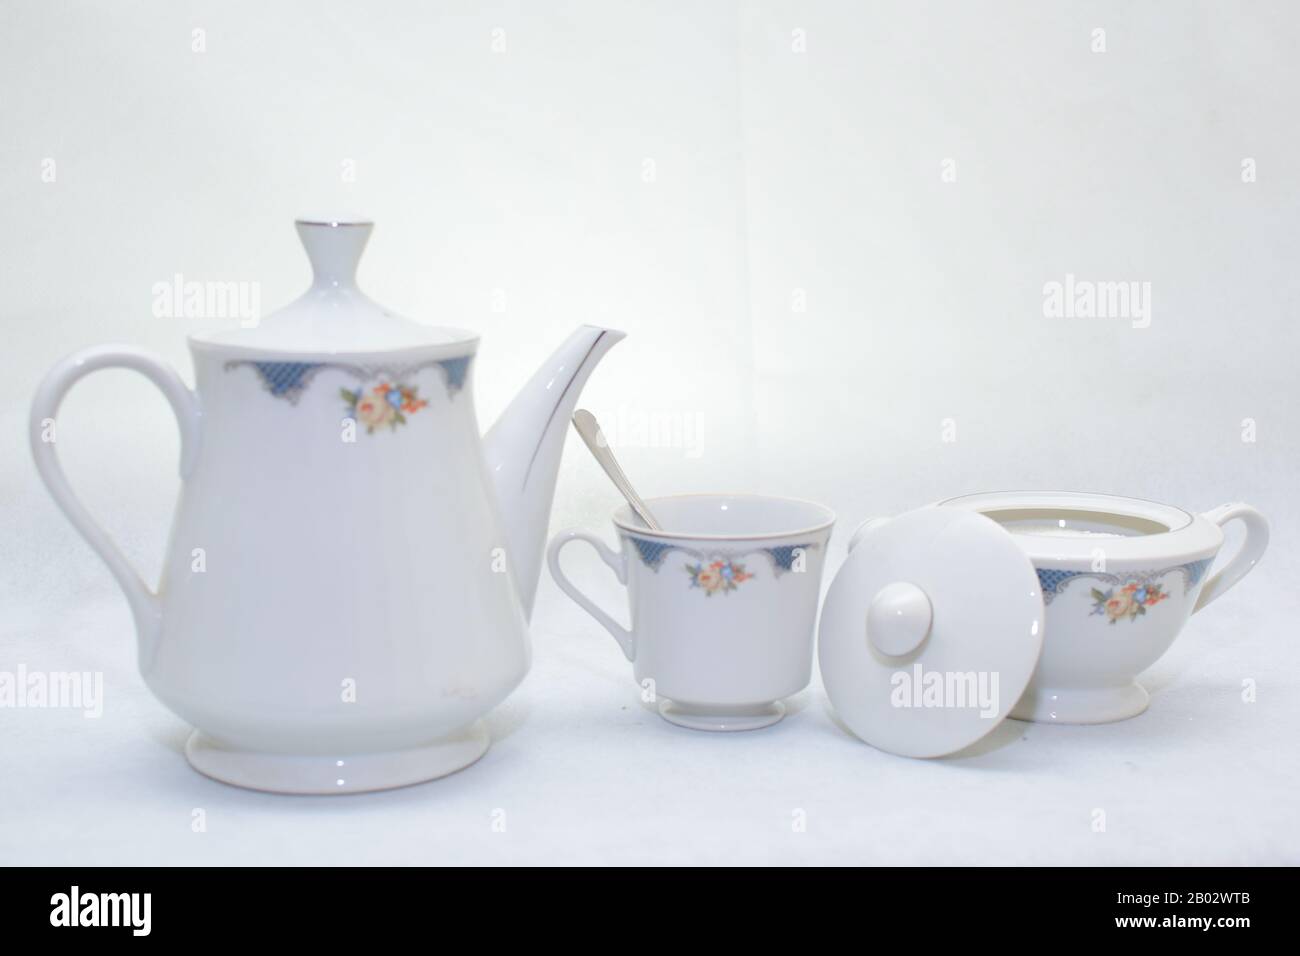 Download Mock Up Design Set Of Elegant And Traditional Teapot Colorful White And Blue Coffee Cup Tea Cup On Cup S Plate Beside The Hot Tea Pot Design Dr Stock Photo Alamy